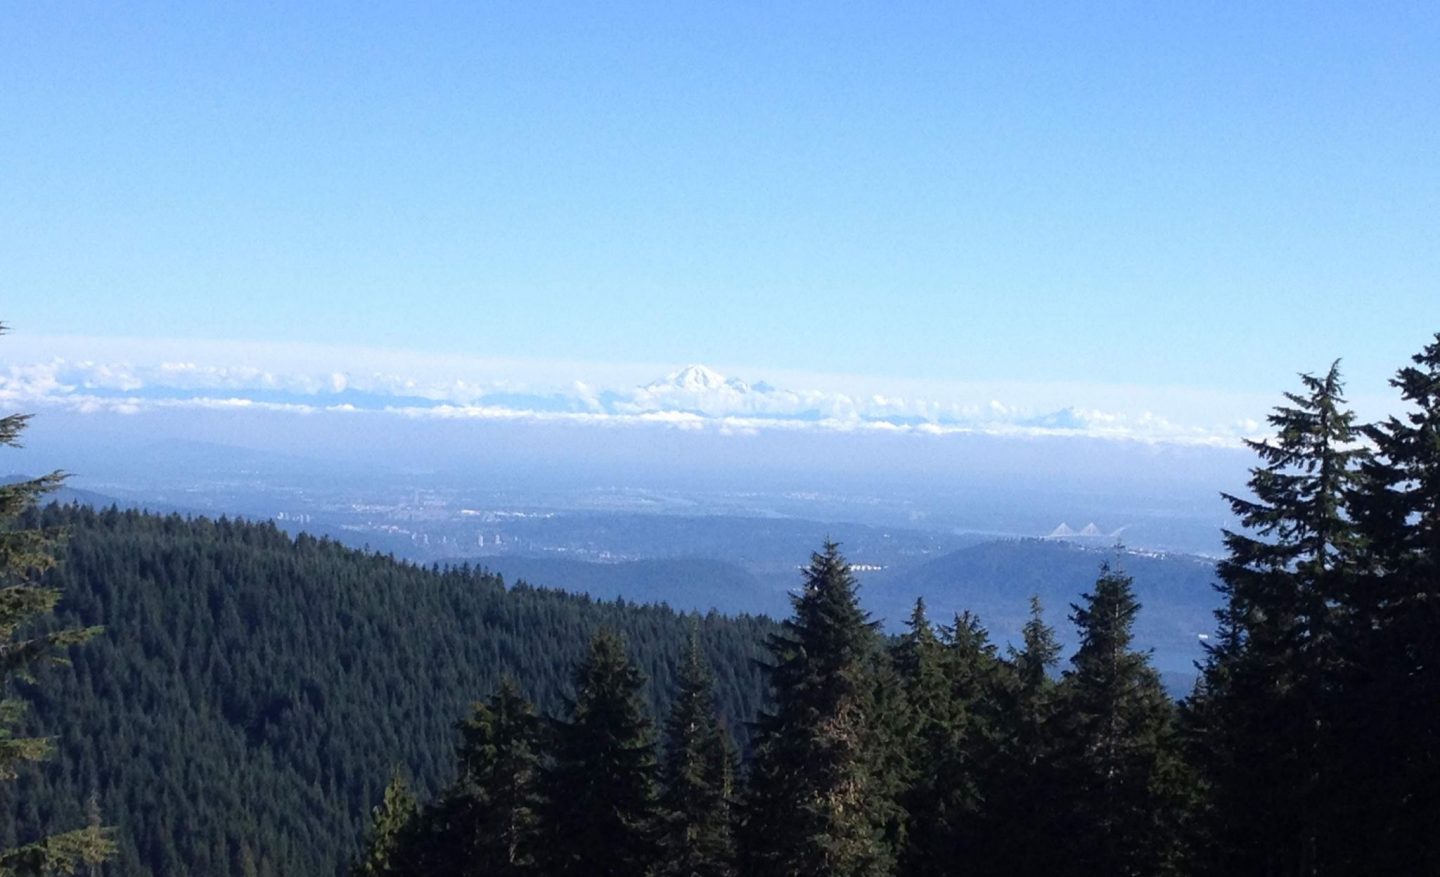 Views over Vancouver from Grouse Mountain